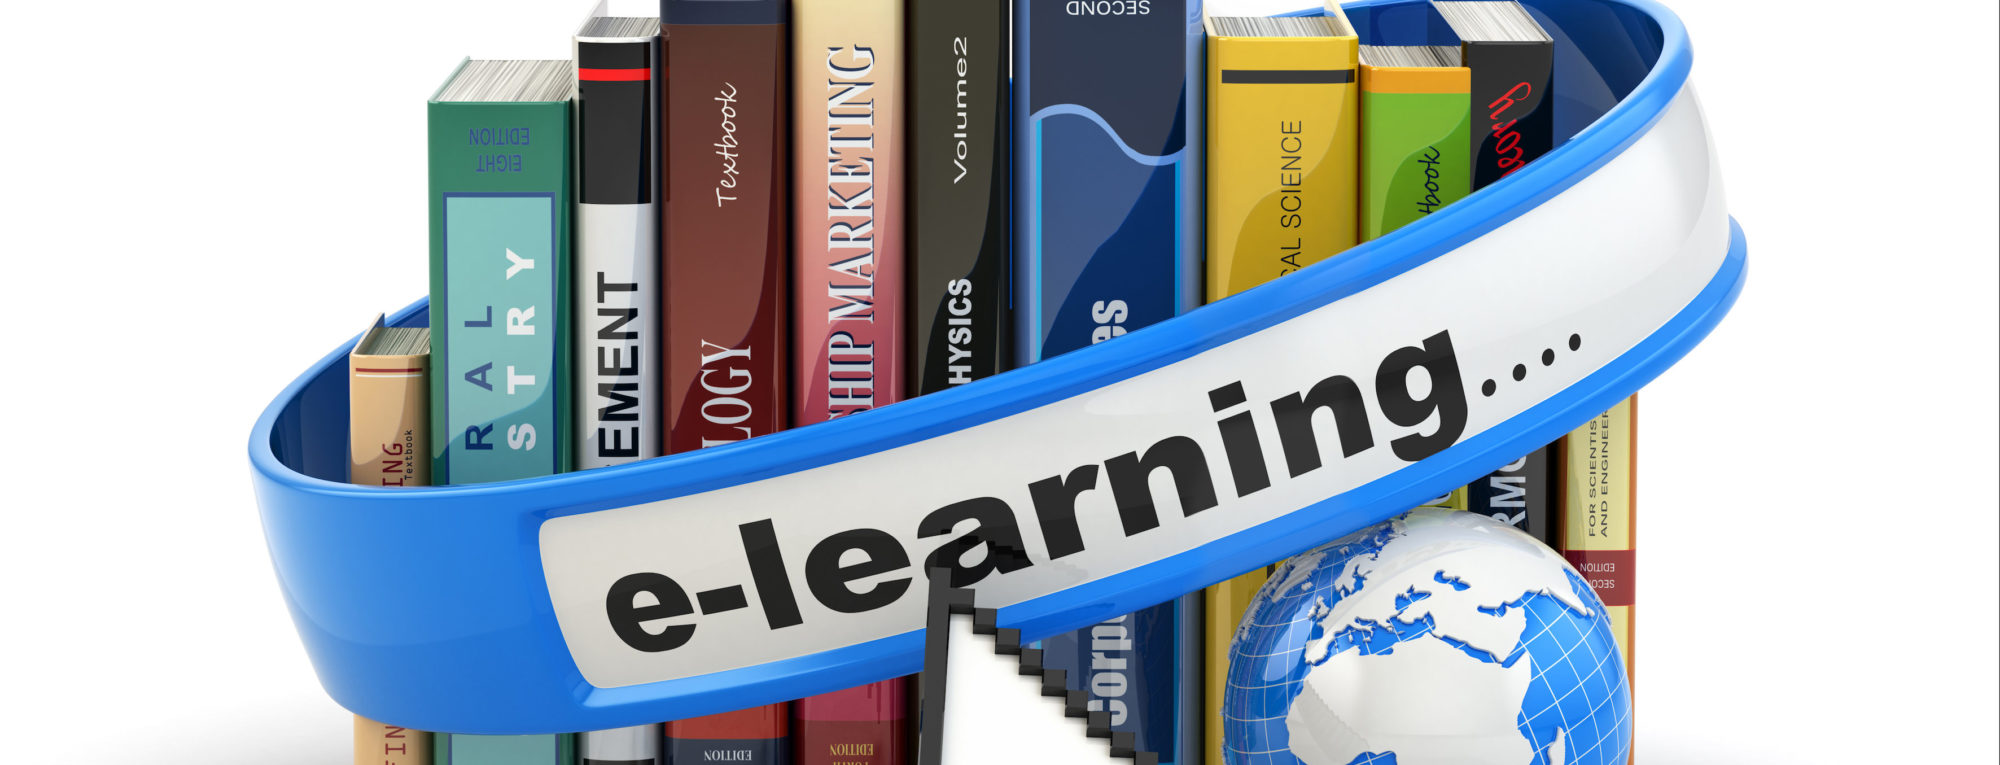 Elearning in the MENA region and medical professional education